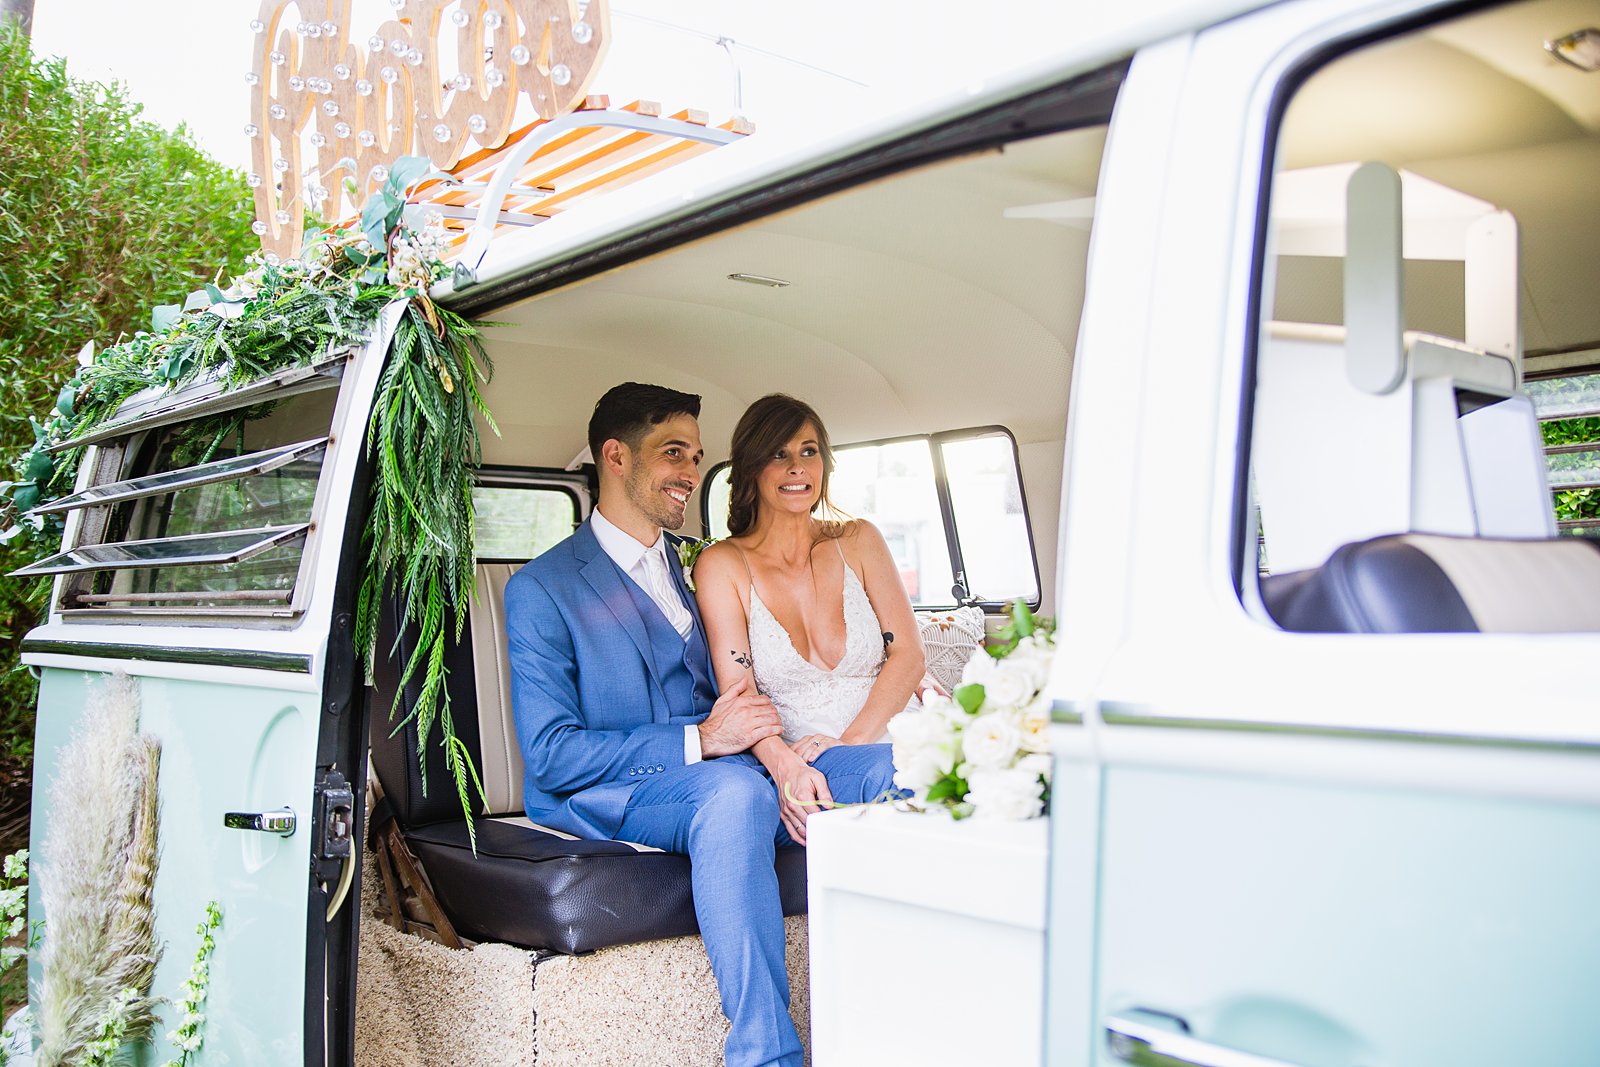 Bride and groom together in the VW Cruisin' Photo Booth Bus booth at Gather Estate wedding by Arizona wedding photographers PMA Photography.